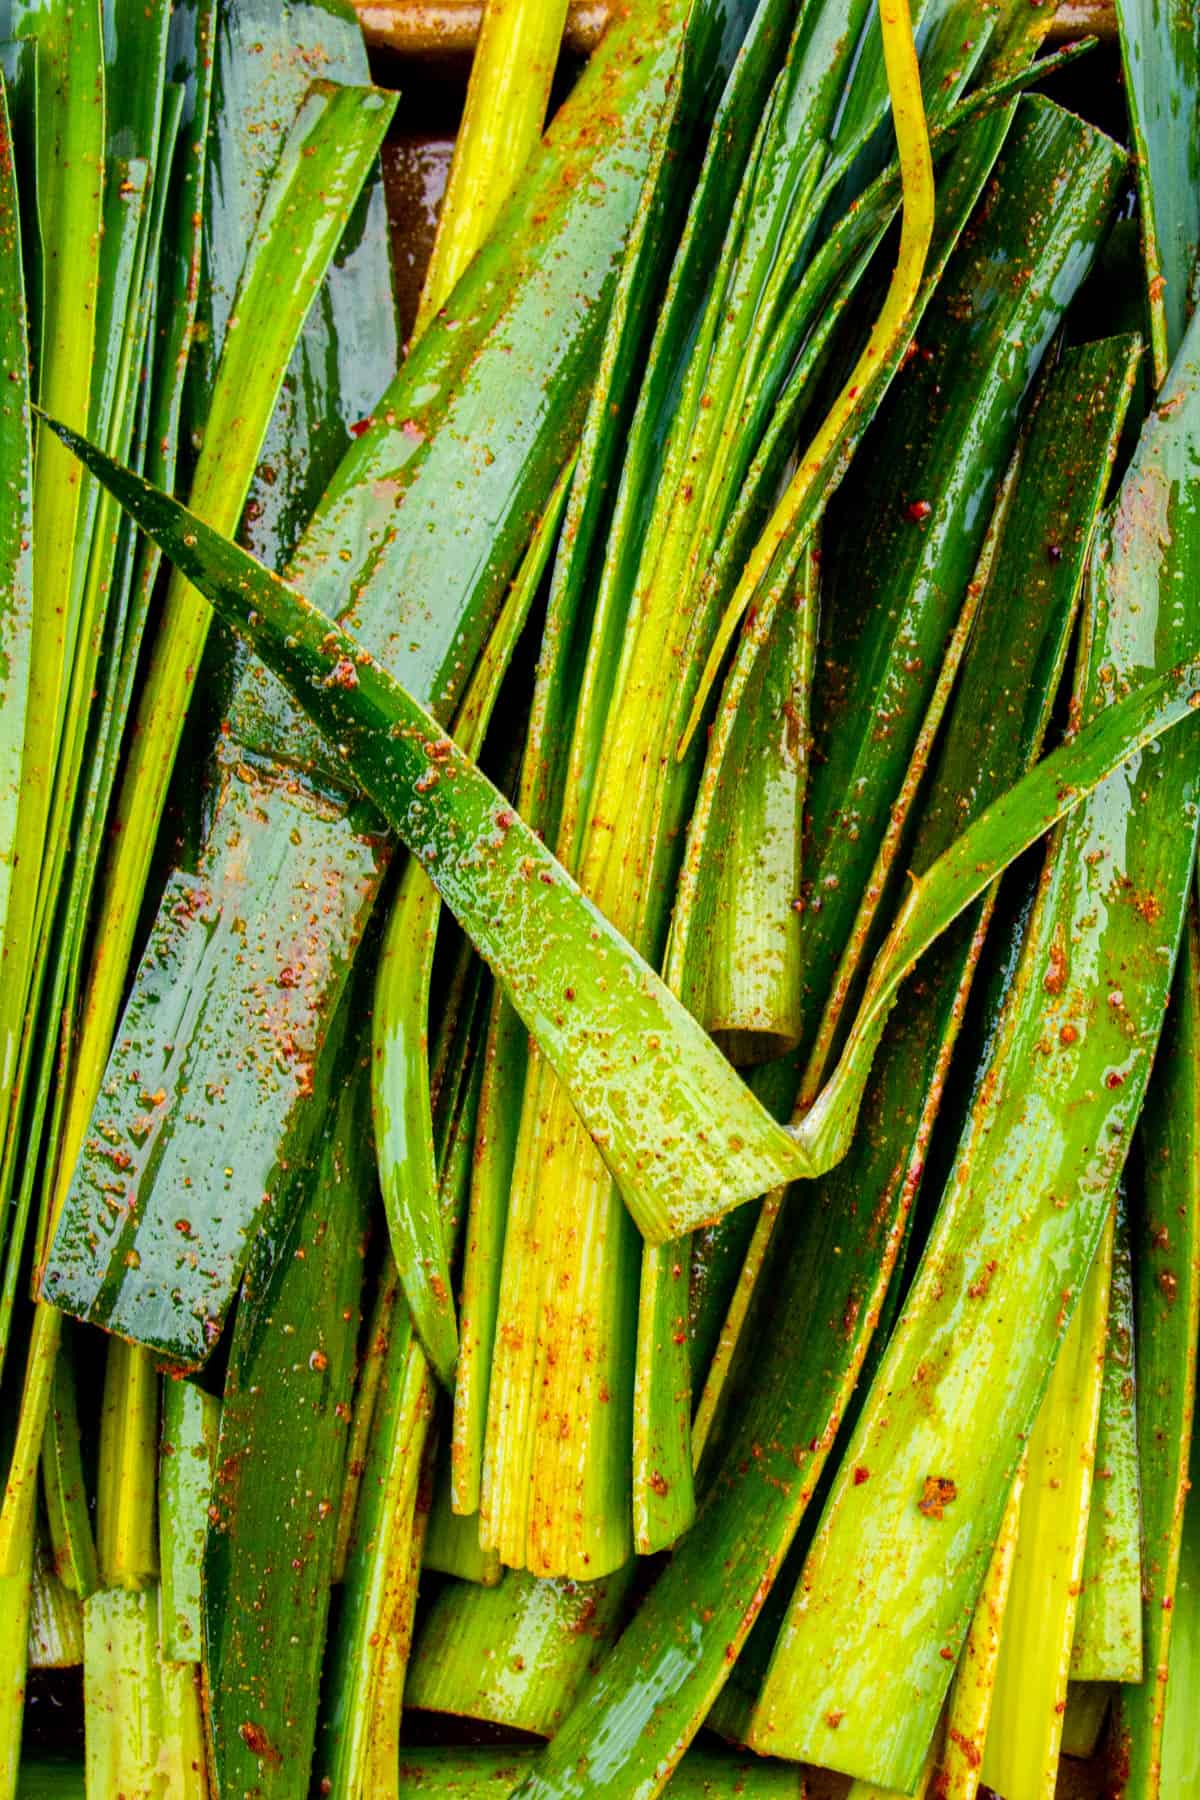 A close up of the spiced green leek tops.